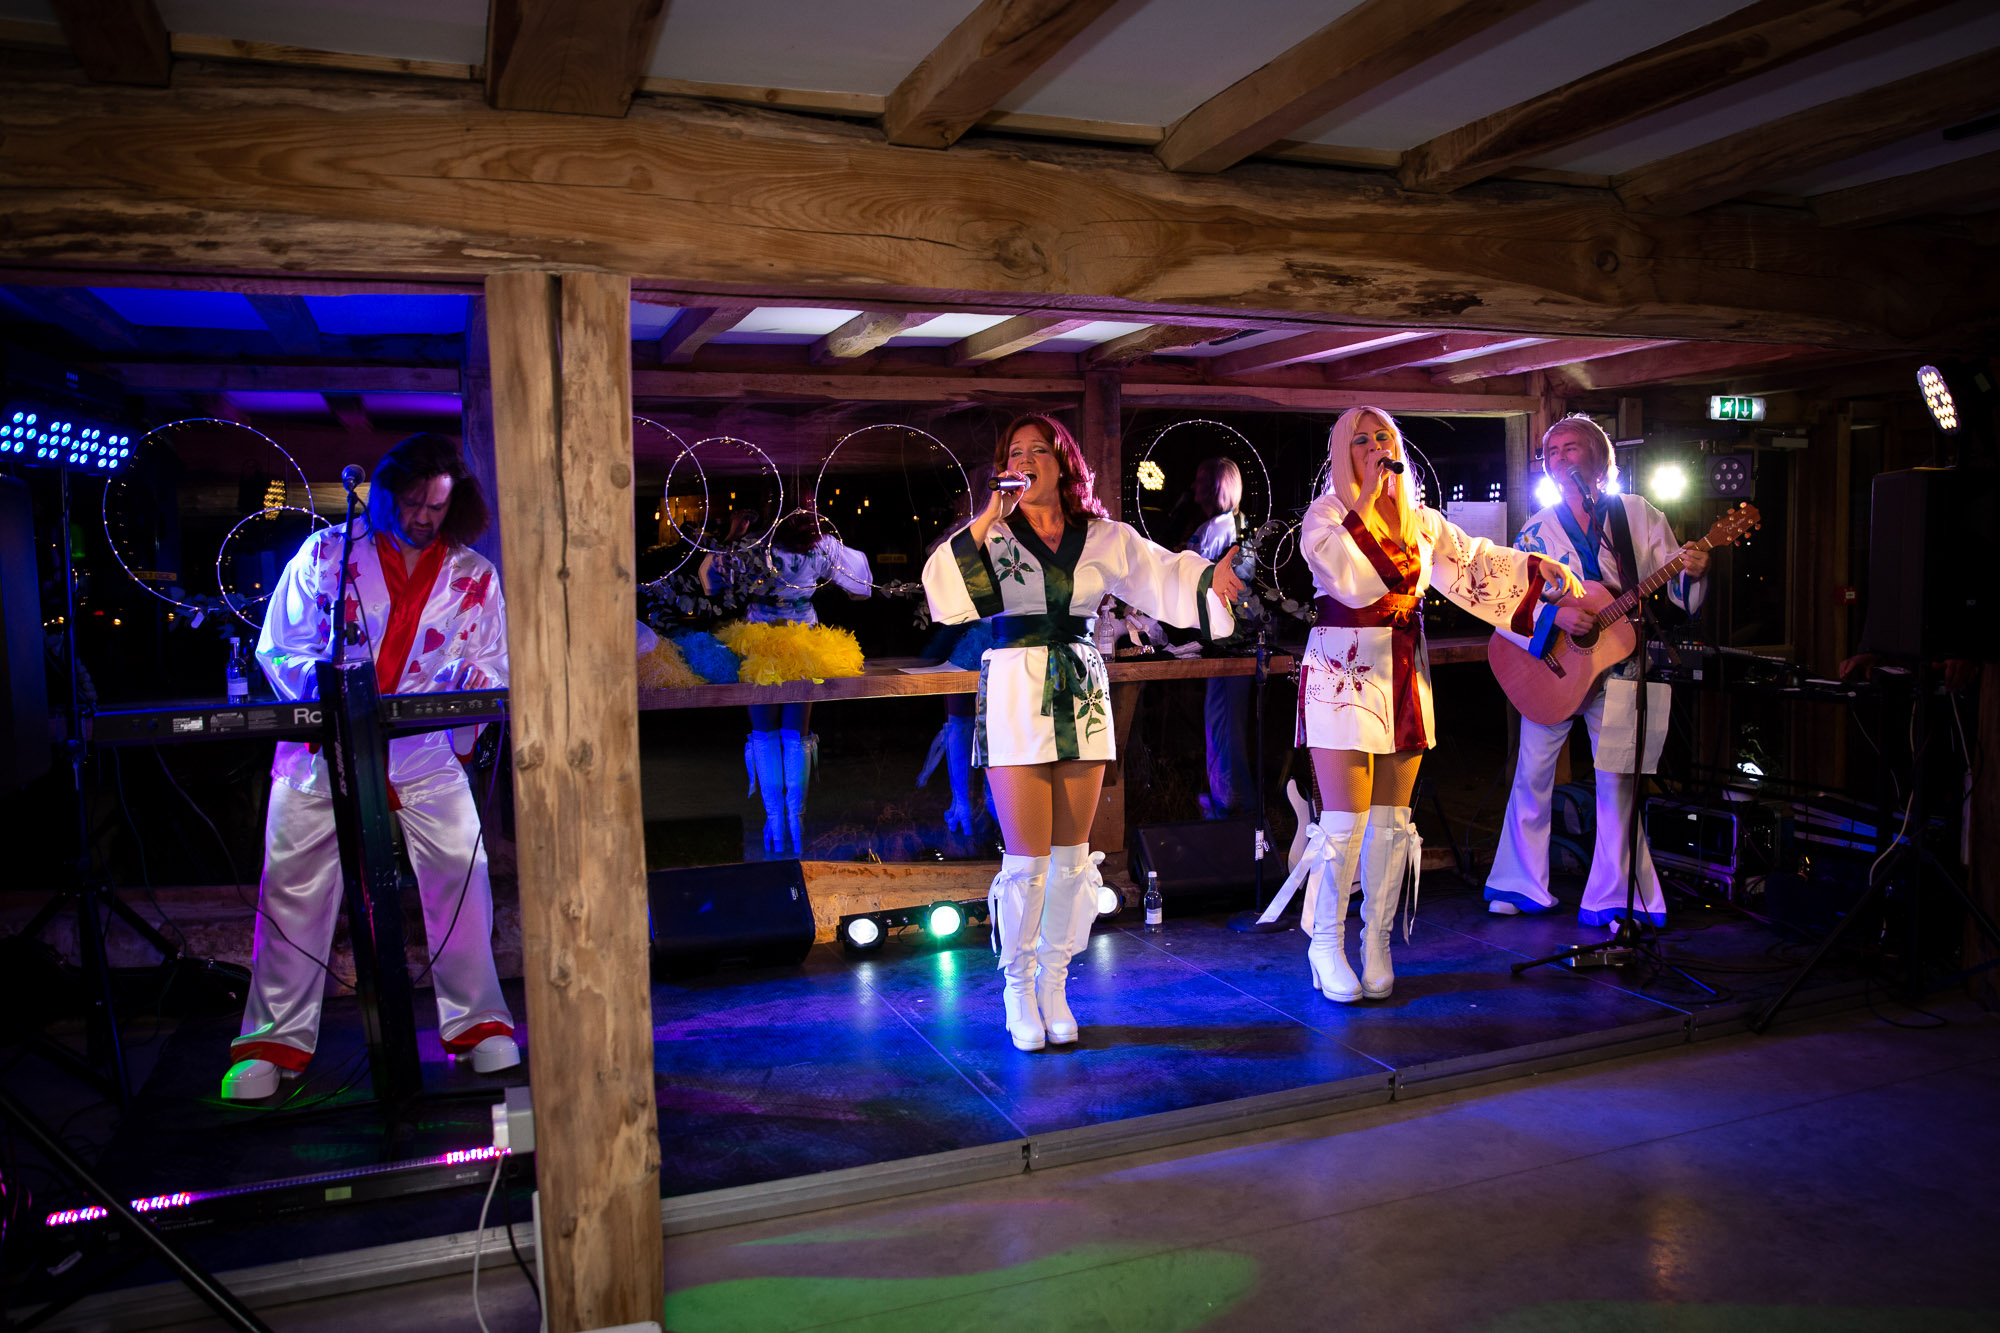 Abba Tribute band for Apres ski themed 50th birthday part at Kingdom in Penshurst photographed by Claire Williamson of Little Olives Photography